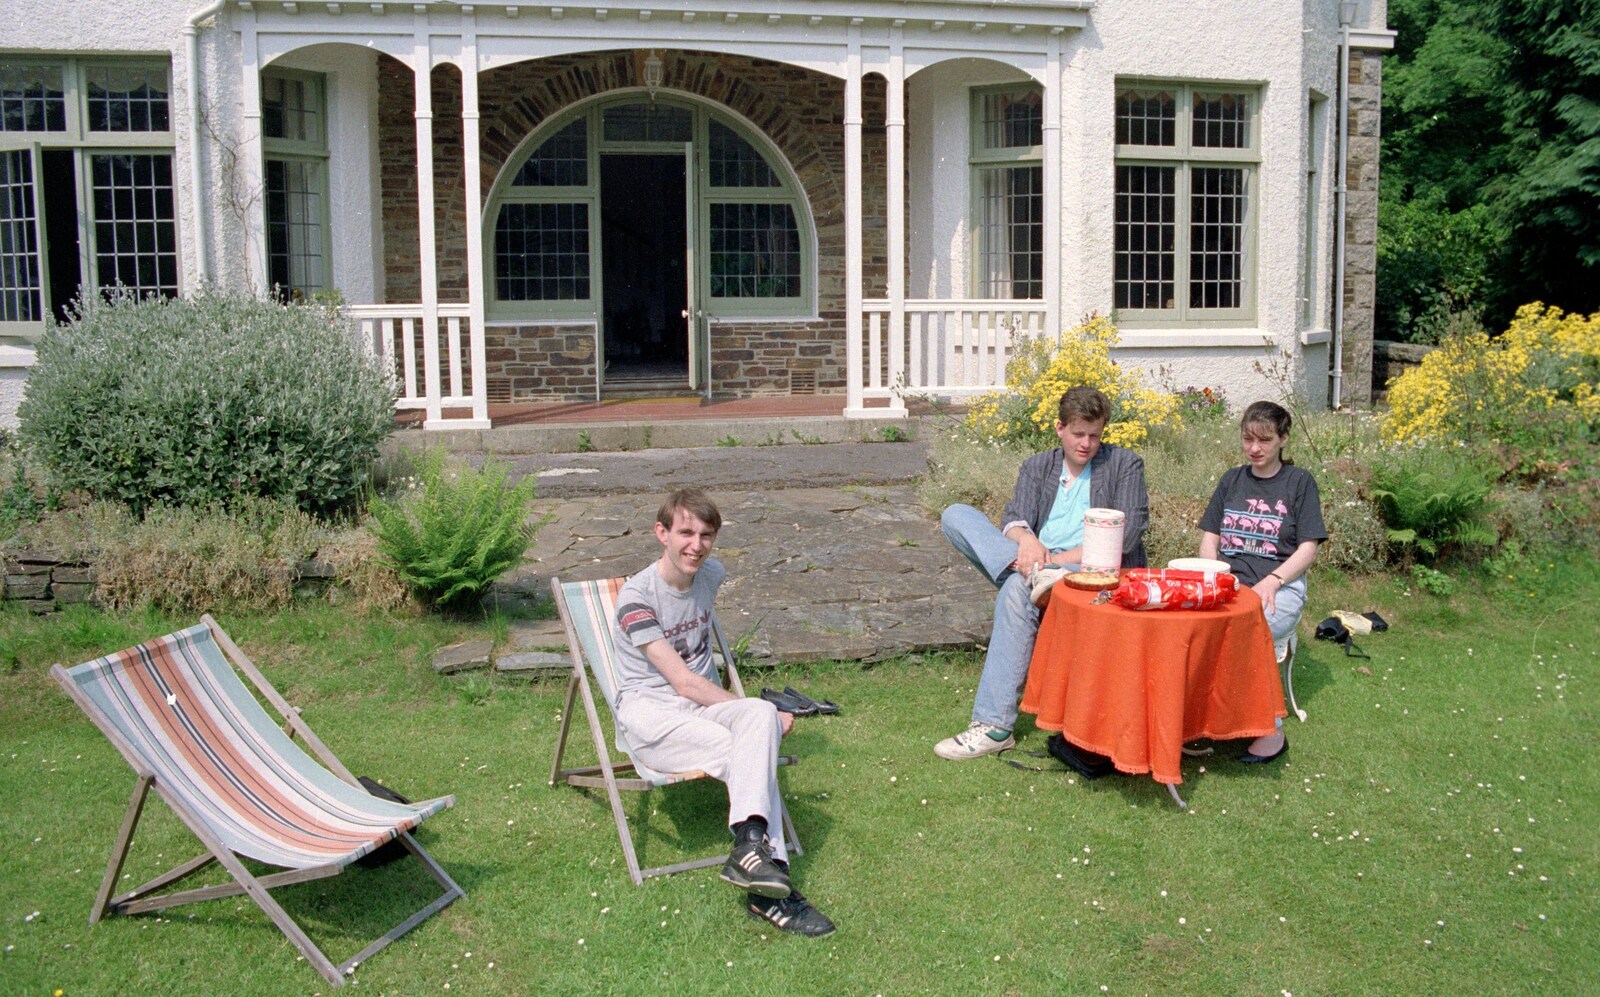 Dave, Jackie and Kate's mate from Uni: Another Side of Student Life, Yelverton, Devon - 23rd June 1989